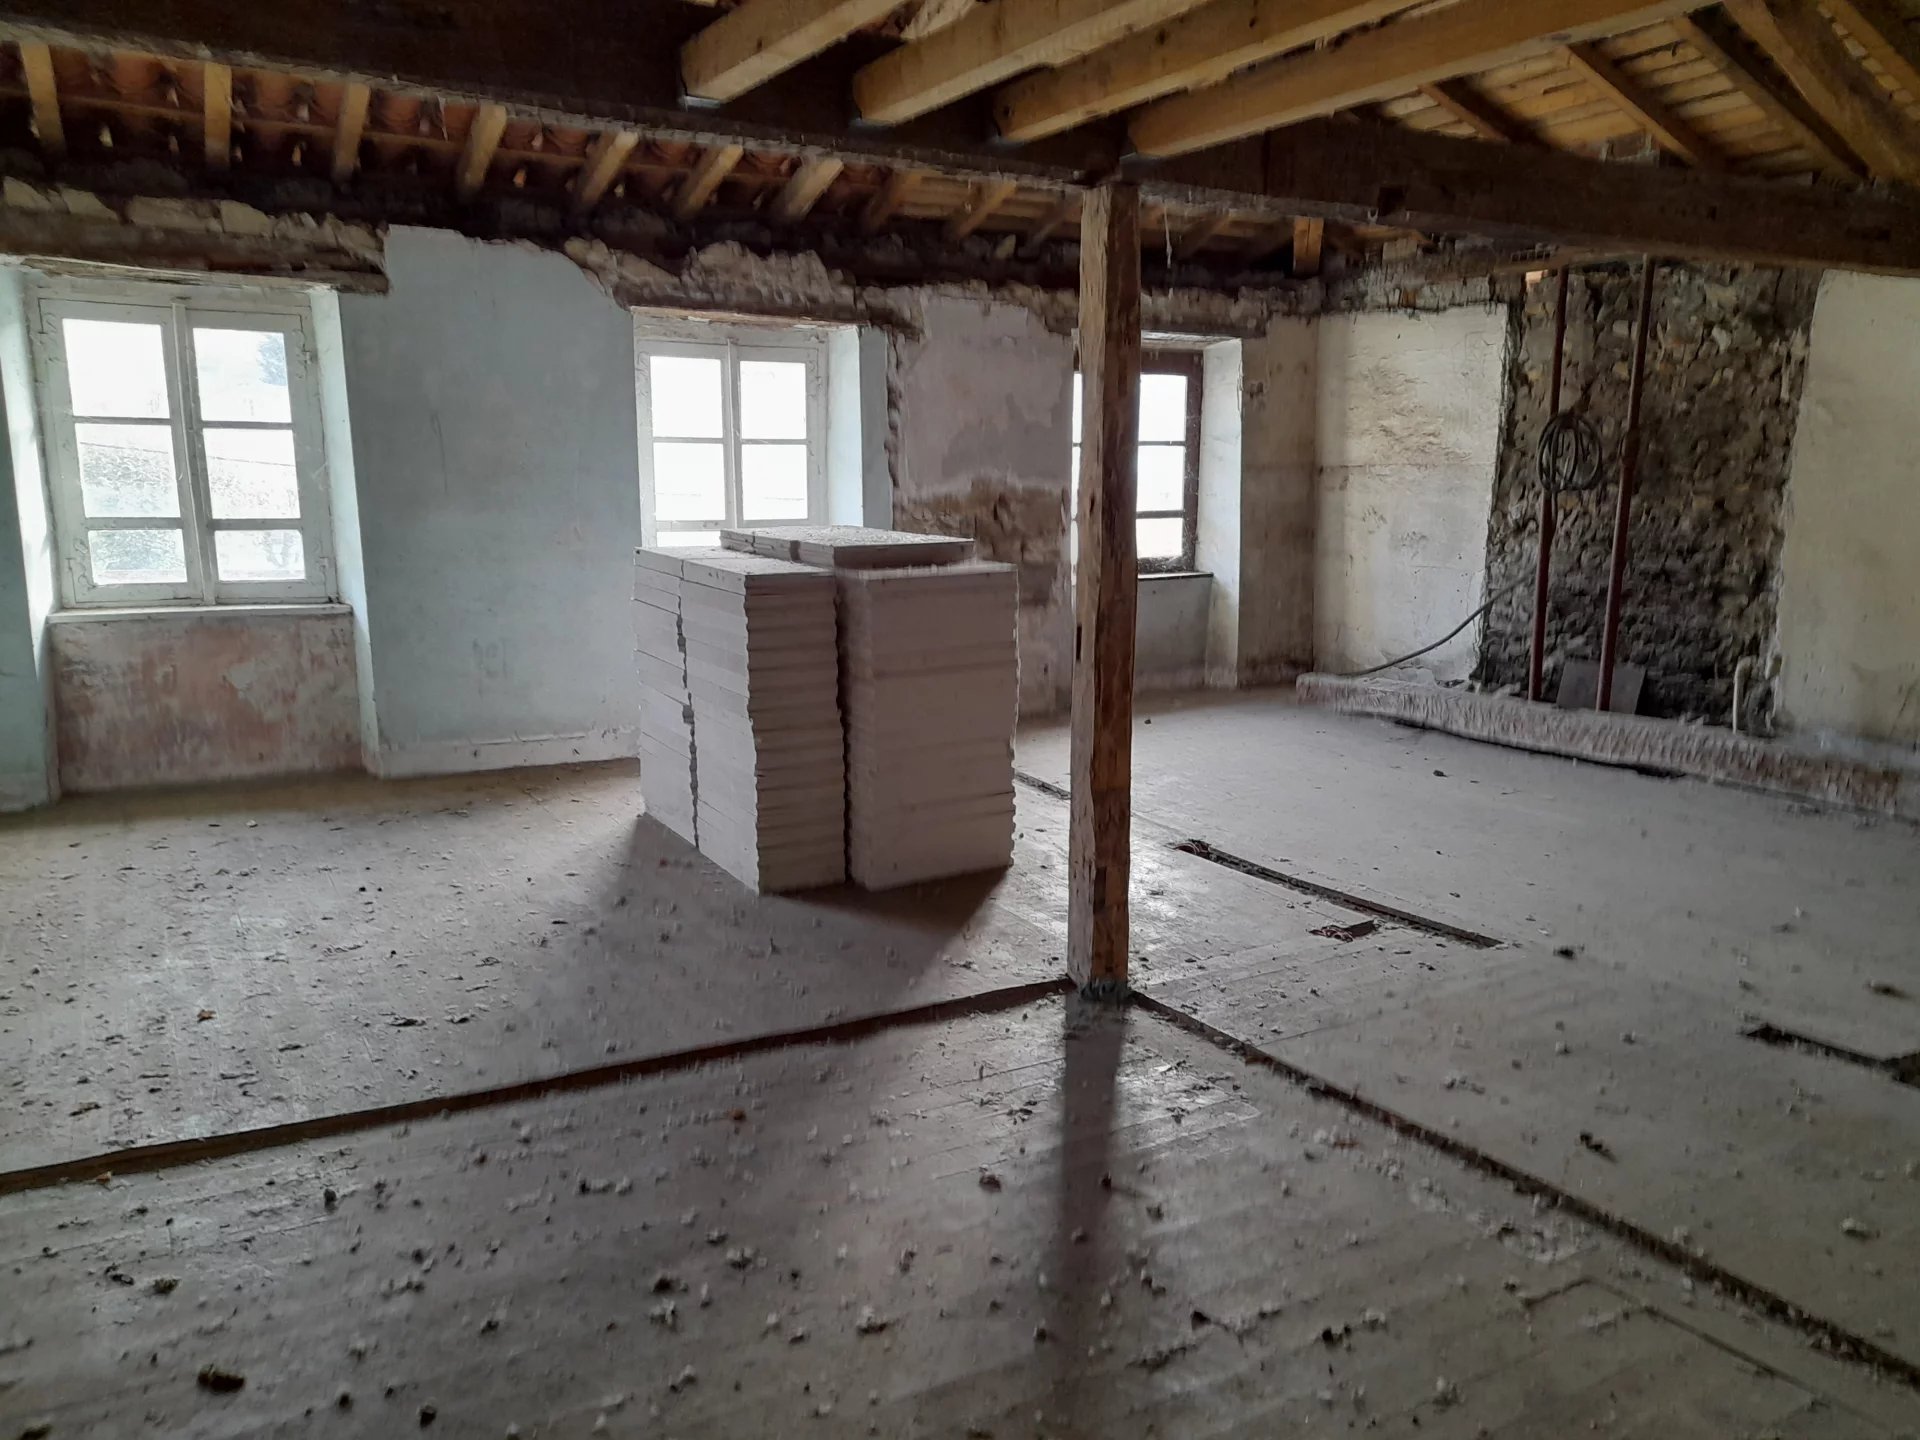 Near Boussens, workshop of 76 m² and apartment of 50 m² to renovate